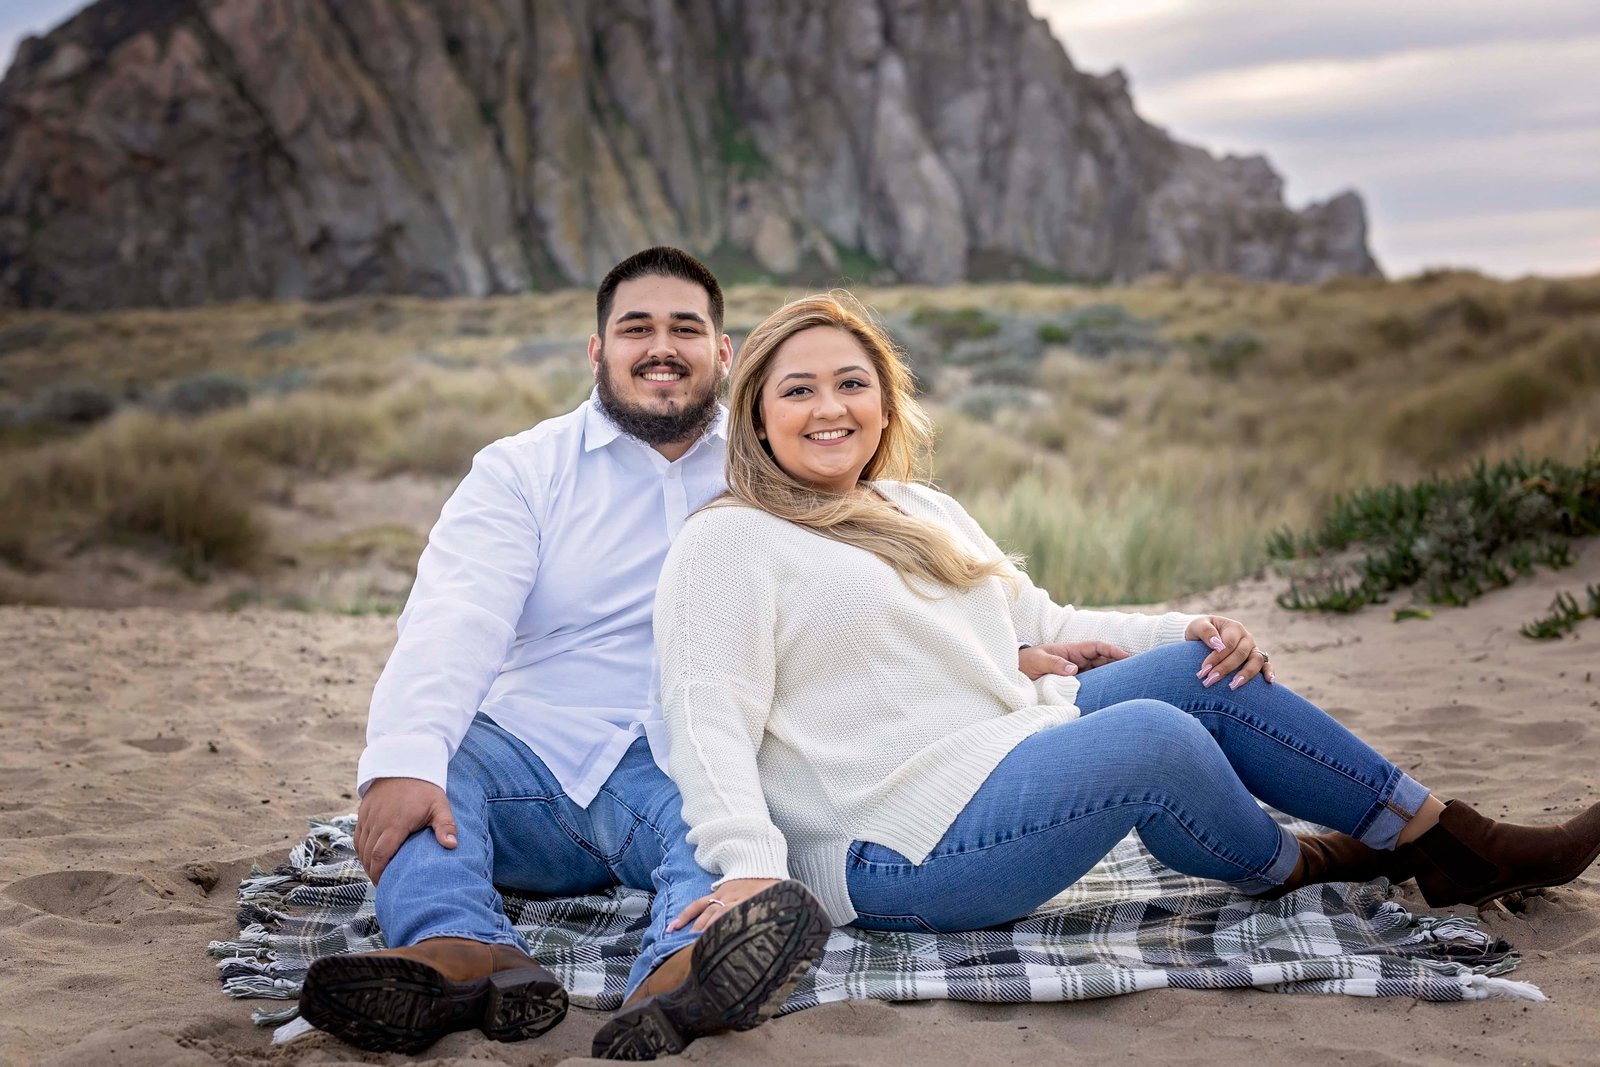 couple sitting together on a blanket in the sand during their engagement photoshoot